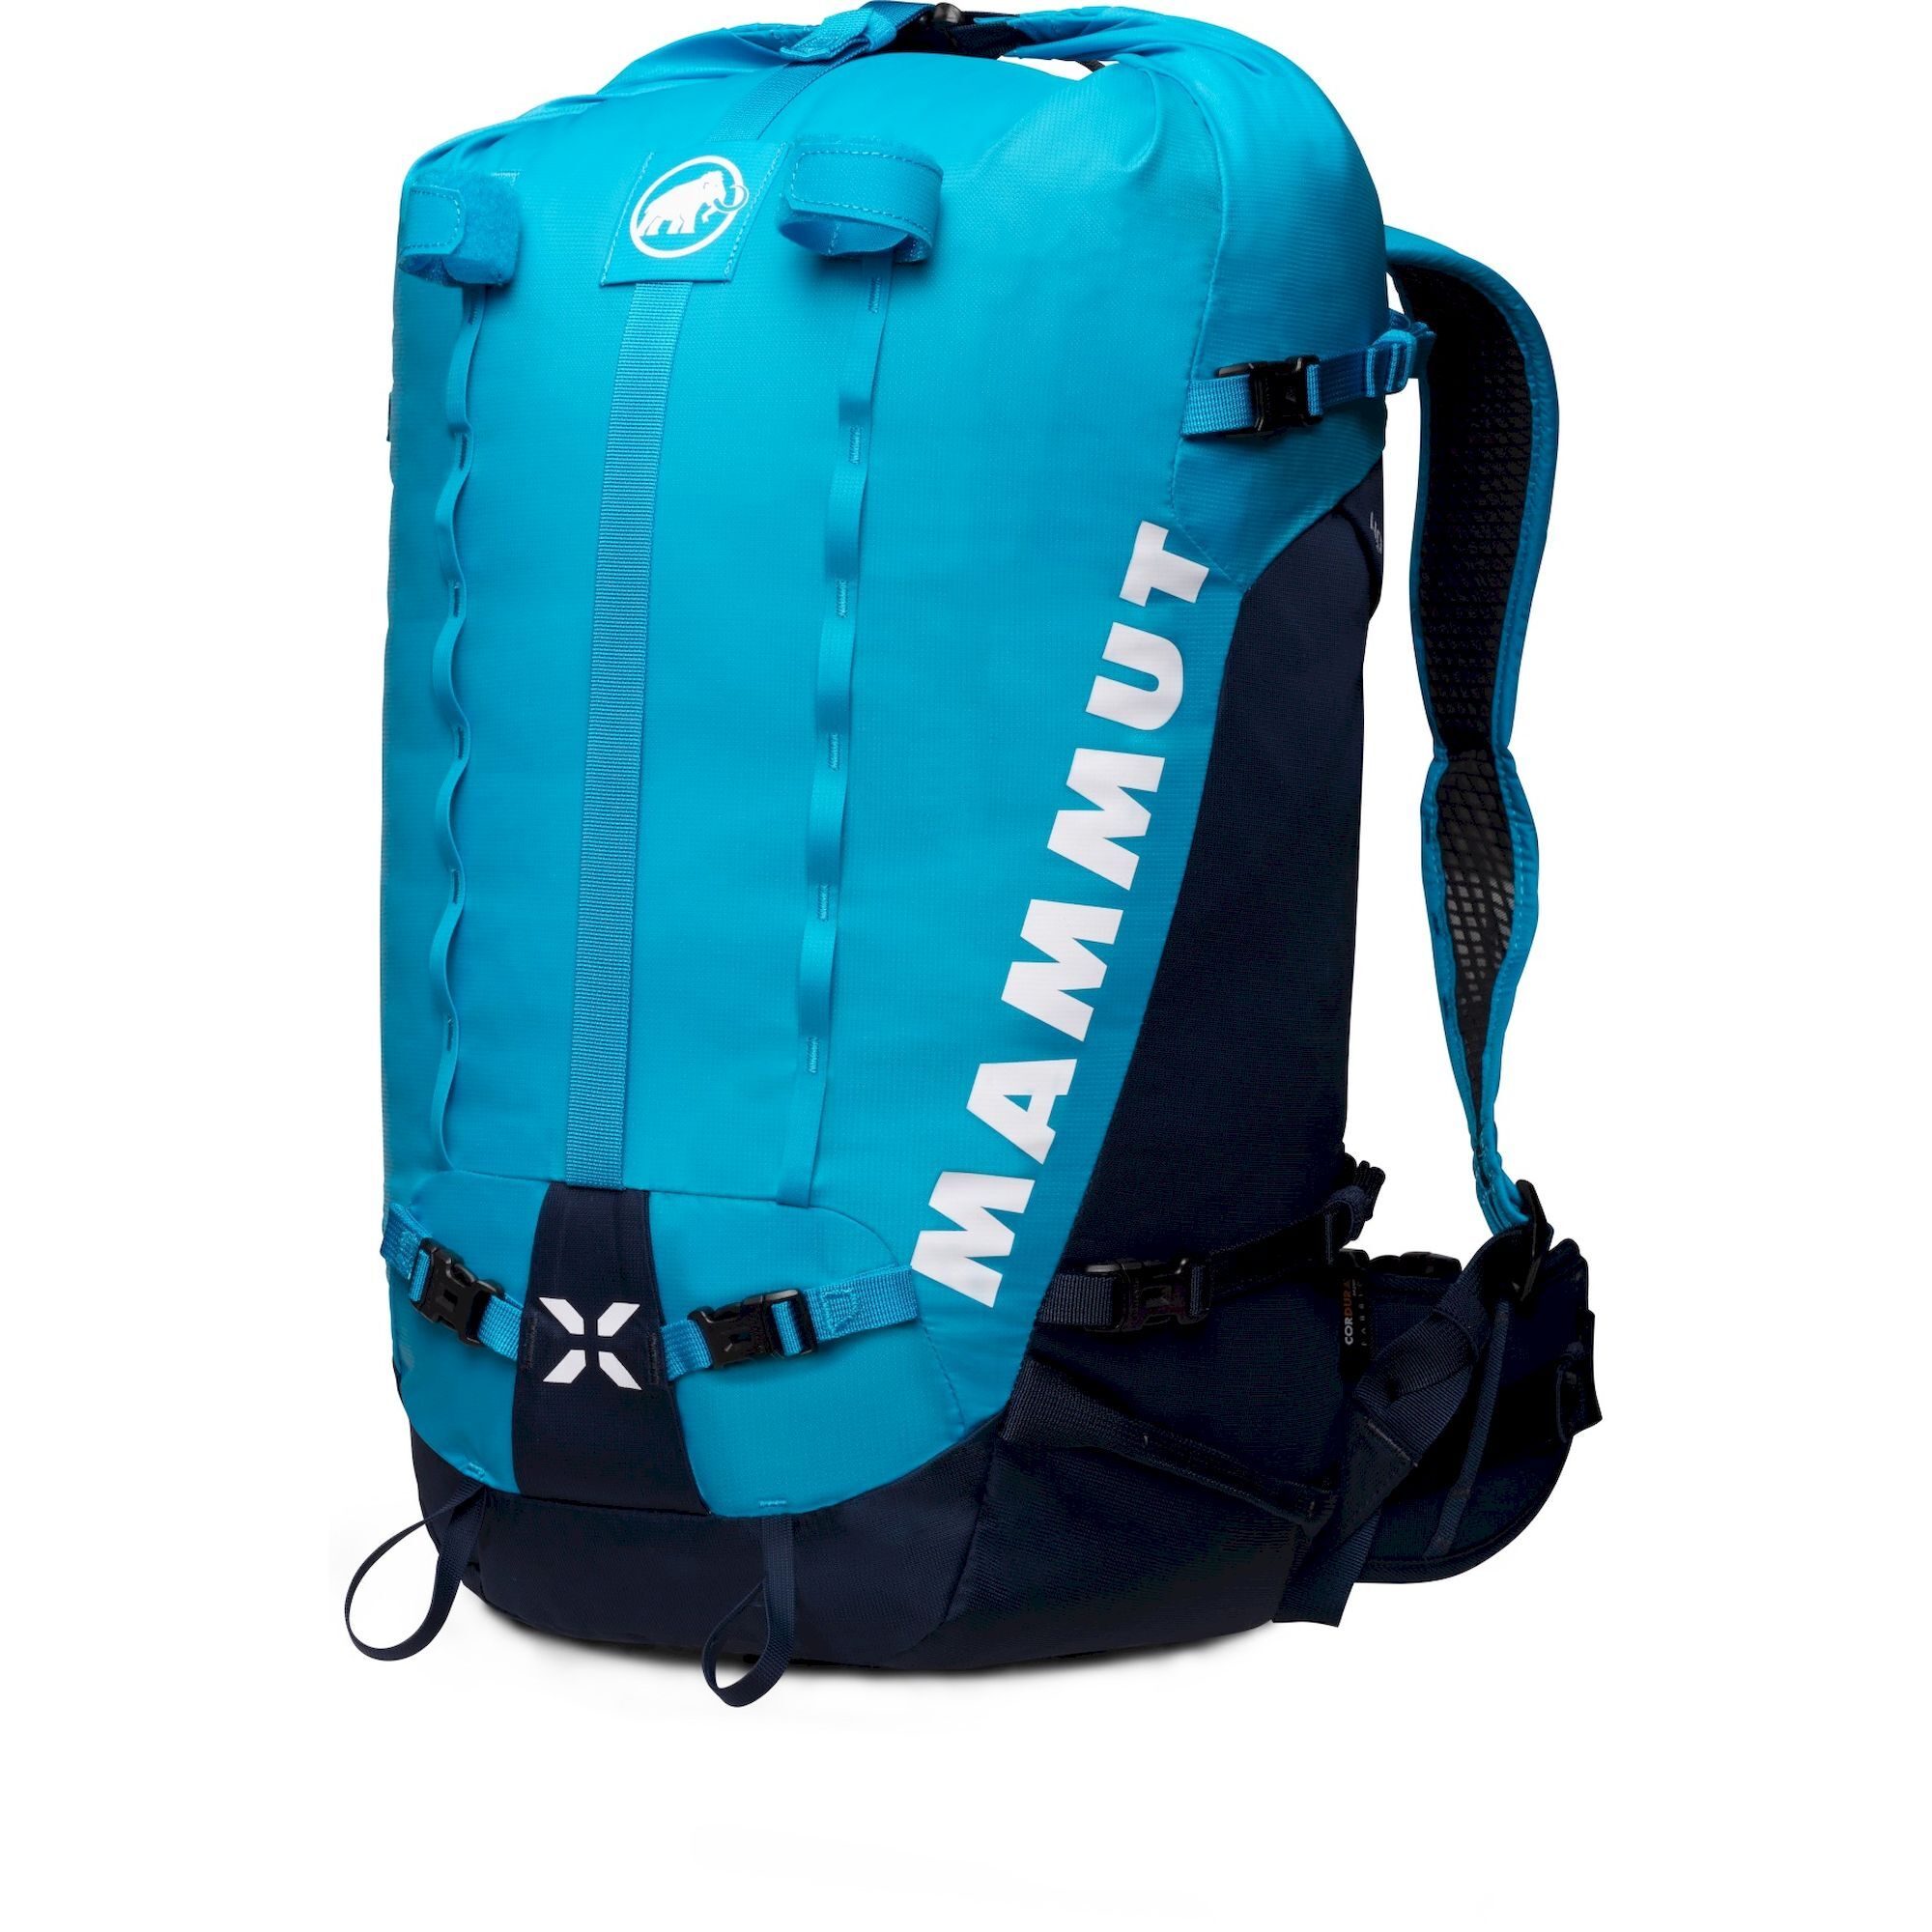 Mammut Trion Nordwand 28 - Mountaineering backpack - Women's